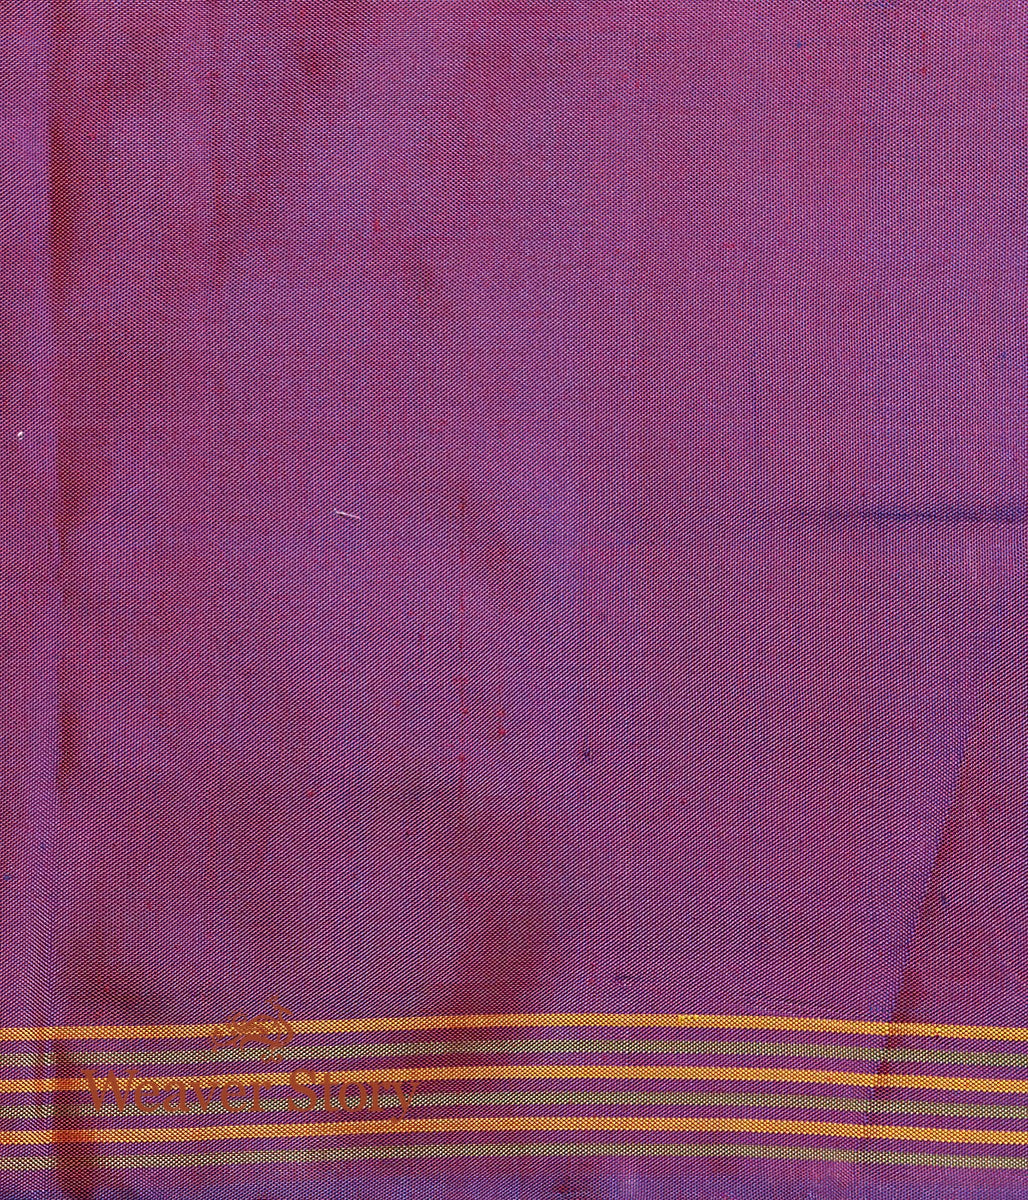 Handwoven_Blue_and_Teal_Dual_Tone_Gujarat_Patola_Saree_with_Purple_Border_WeaverStory_05